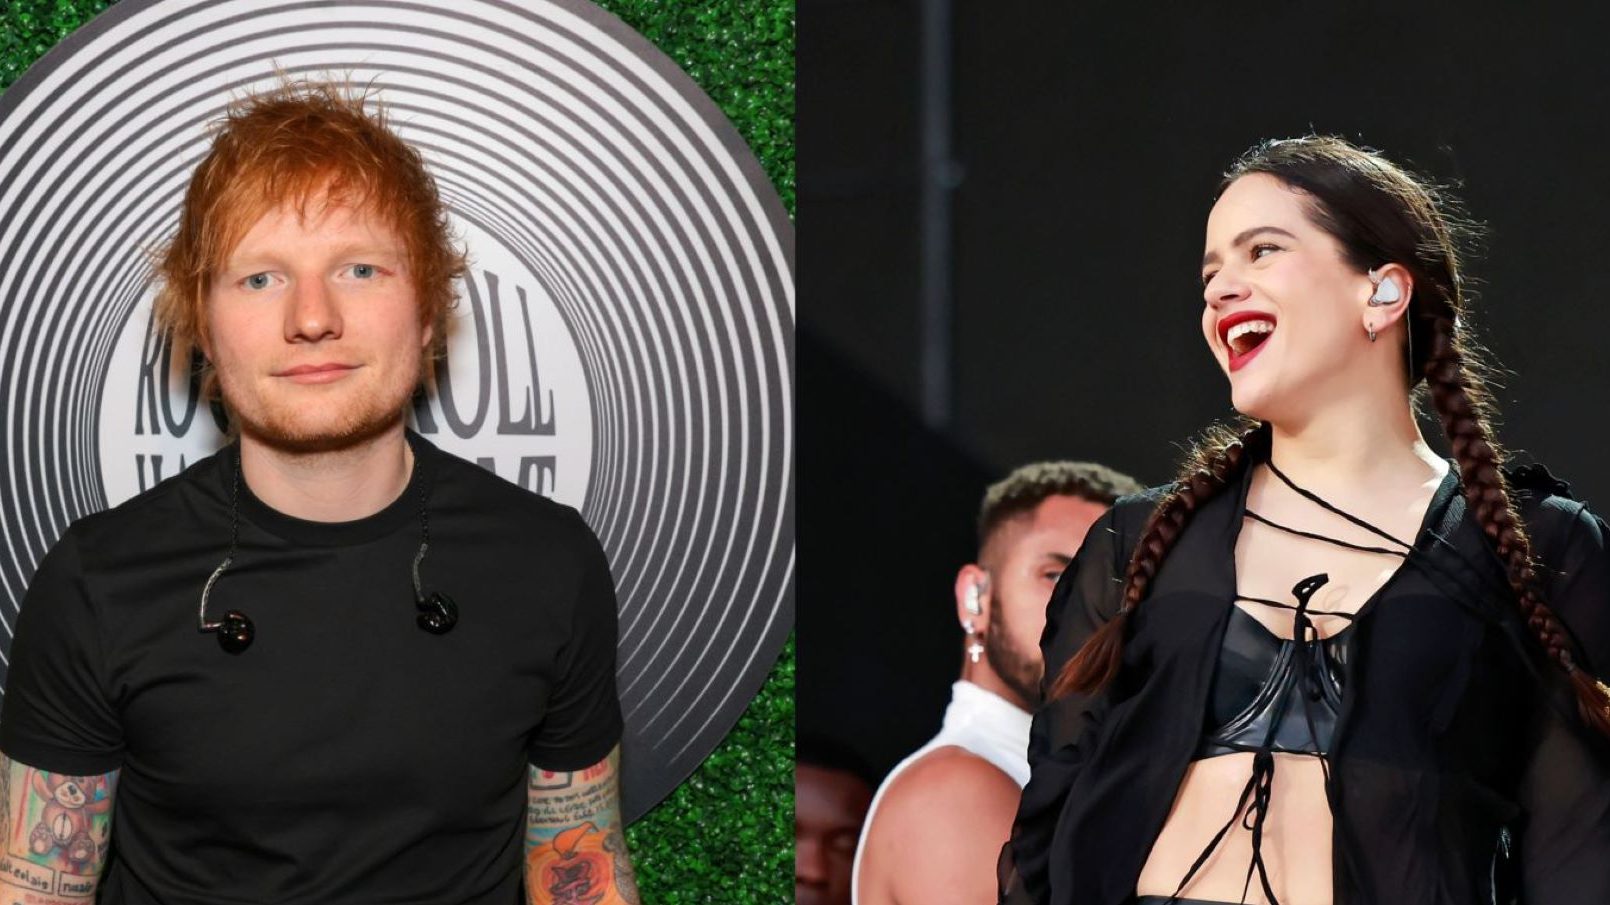 With Which Diva Does Ed Sheeran Want to Collaborate?